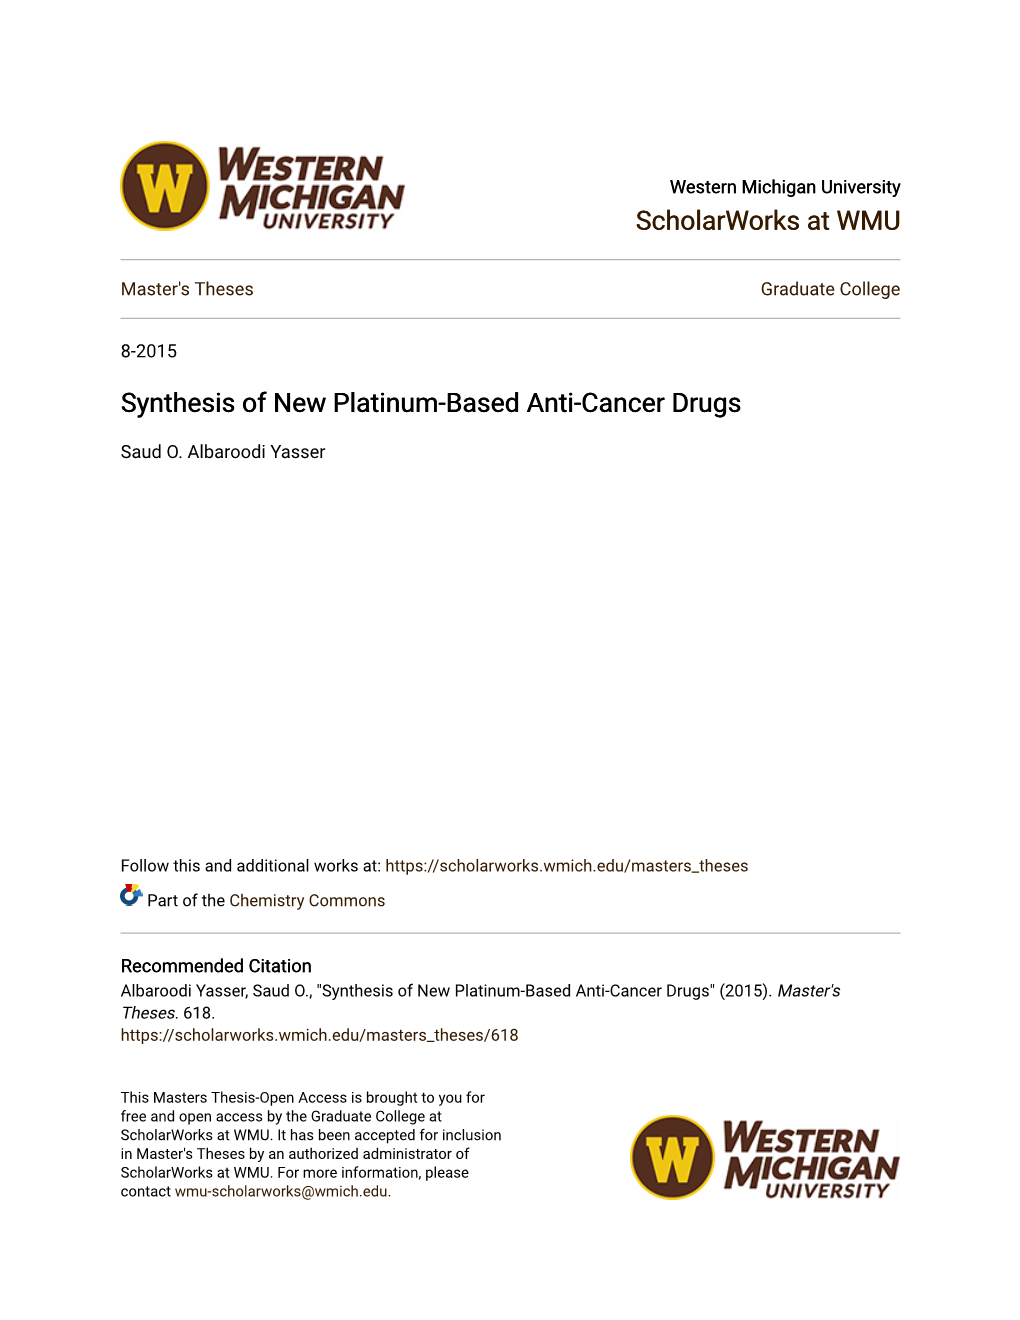 Synthesis of New Platinum-Based Anti-Cancer Drugs